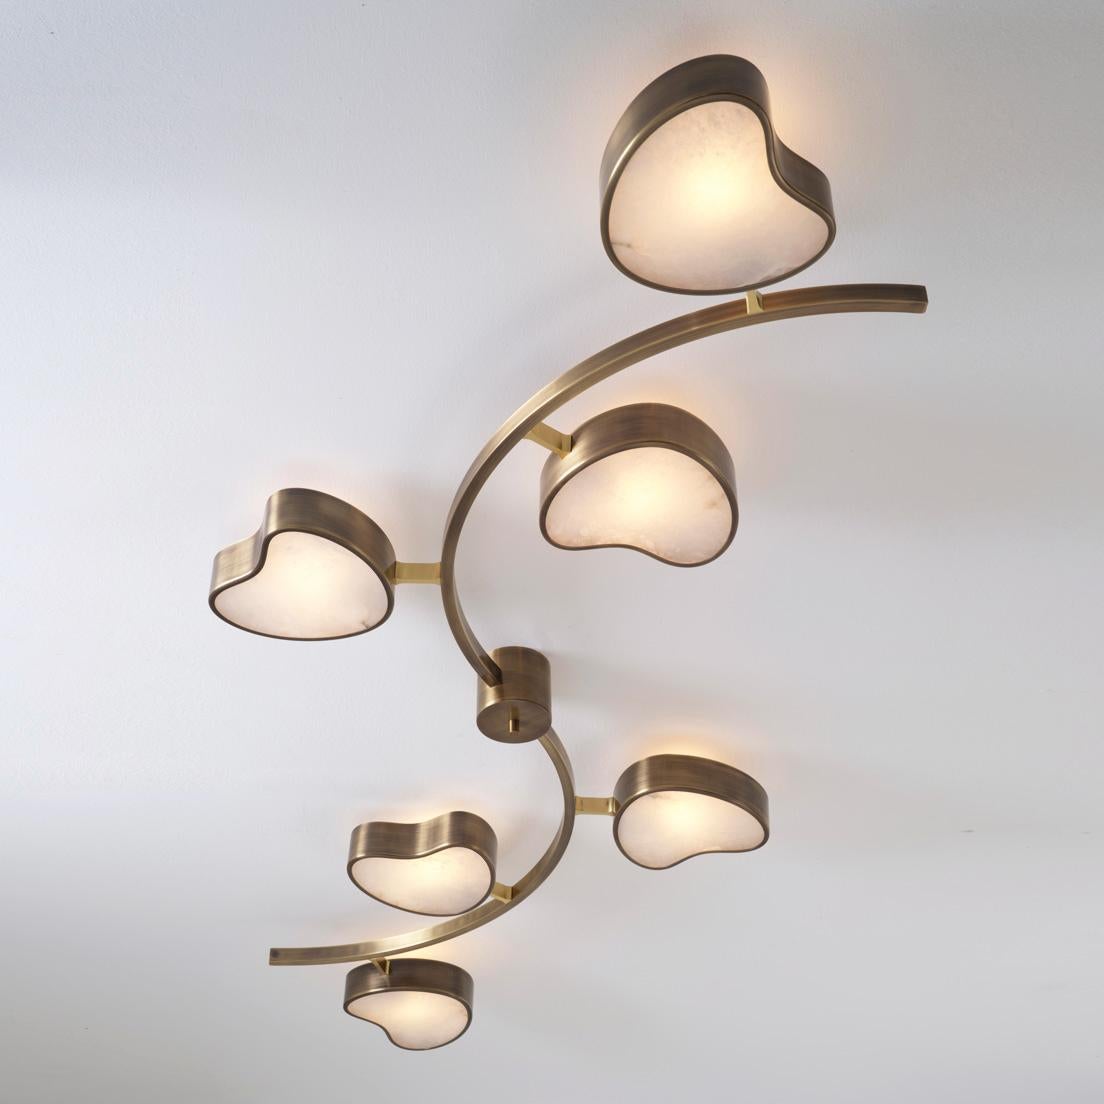 Brass Cuore N.6 Ceiling Light by Gaspare Asaro. Peltro and Bronze Finish For Sale